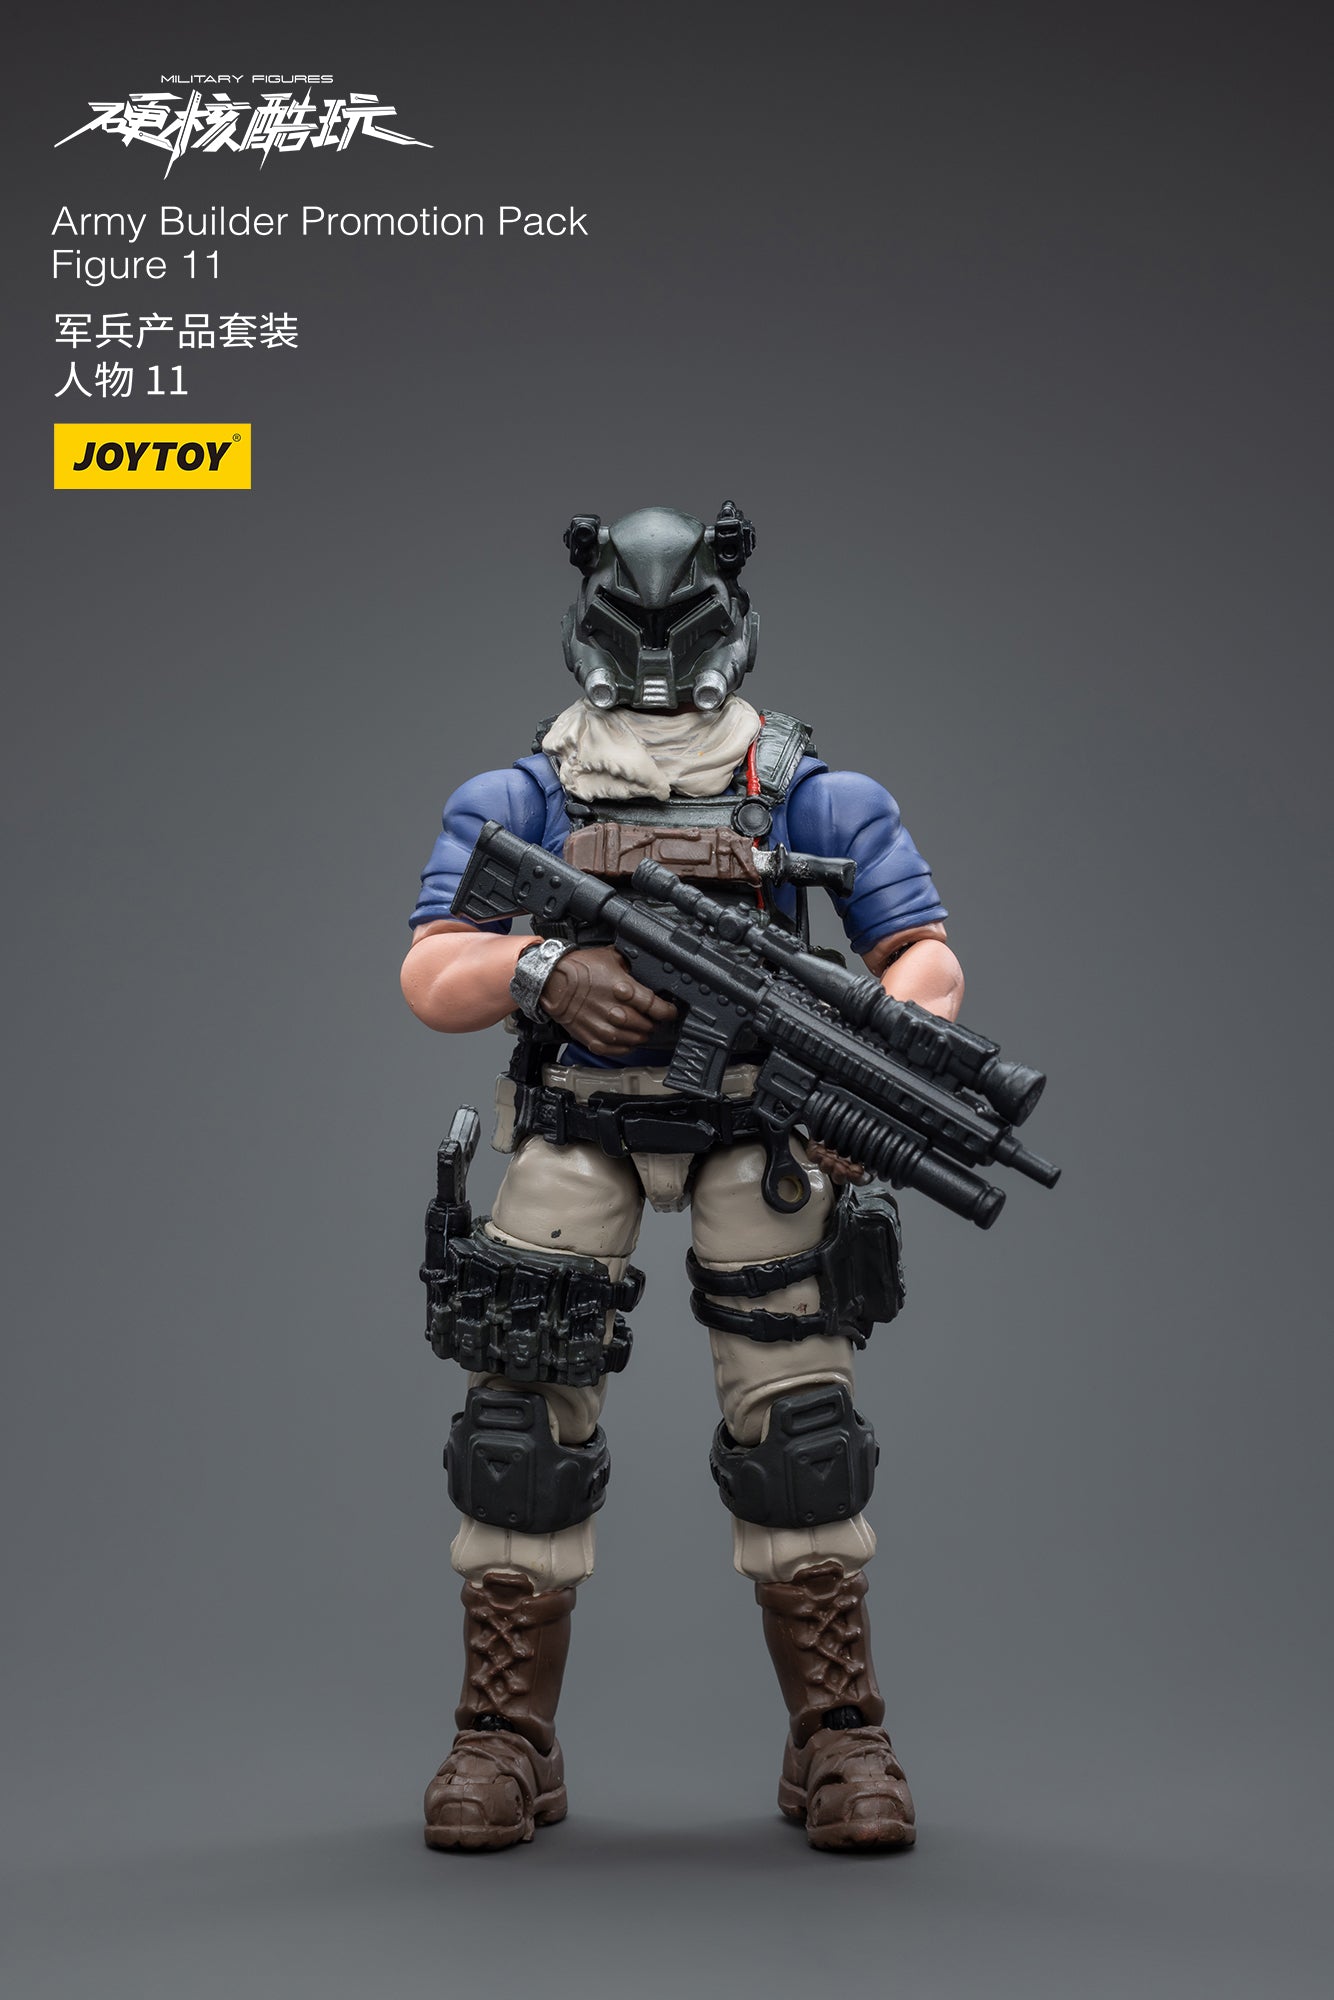 Army Builder Promotion Pack Figure 11 - Military Action Figure By JOYTOY